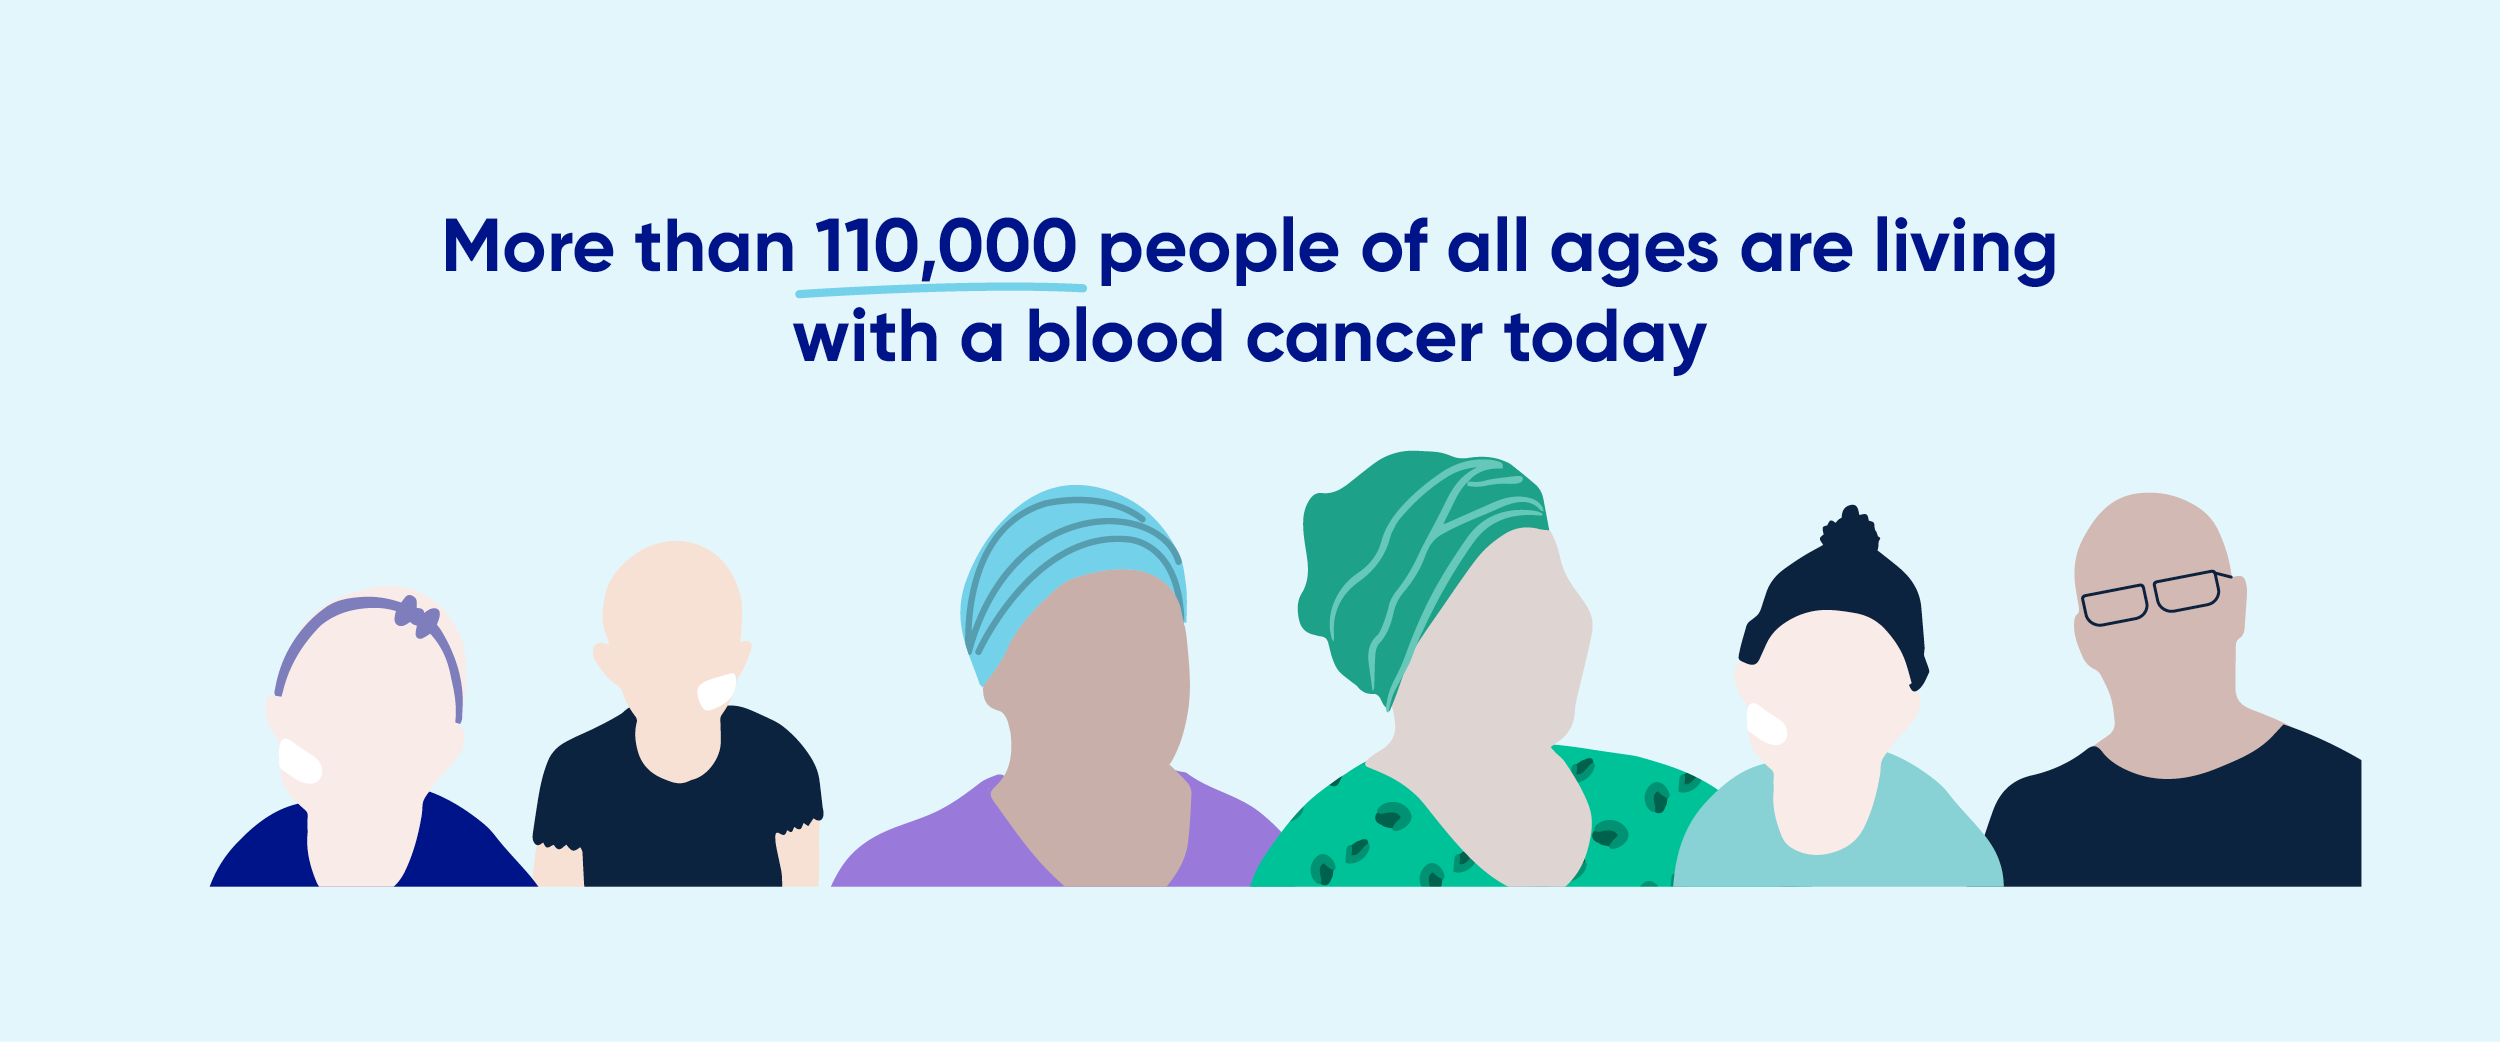 More than 110,000 people are living with a blood cancer